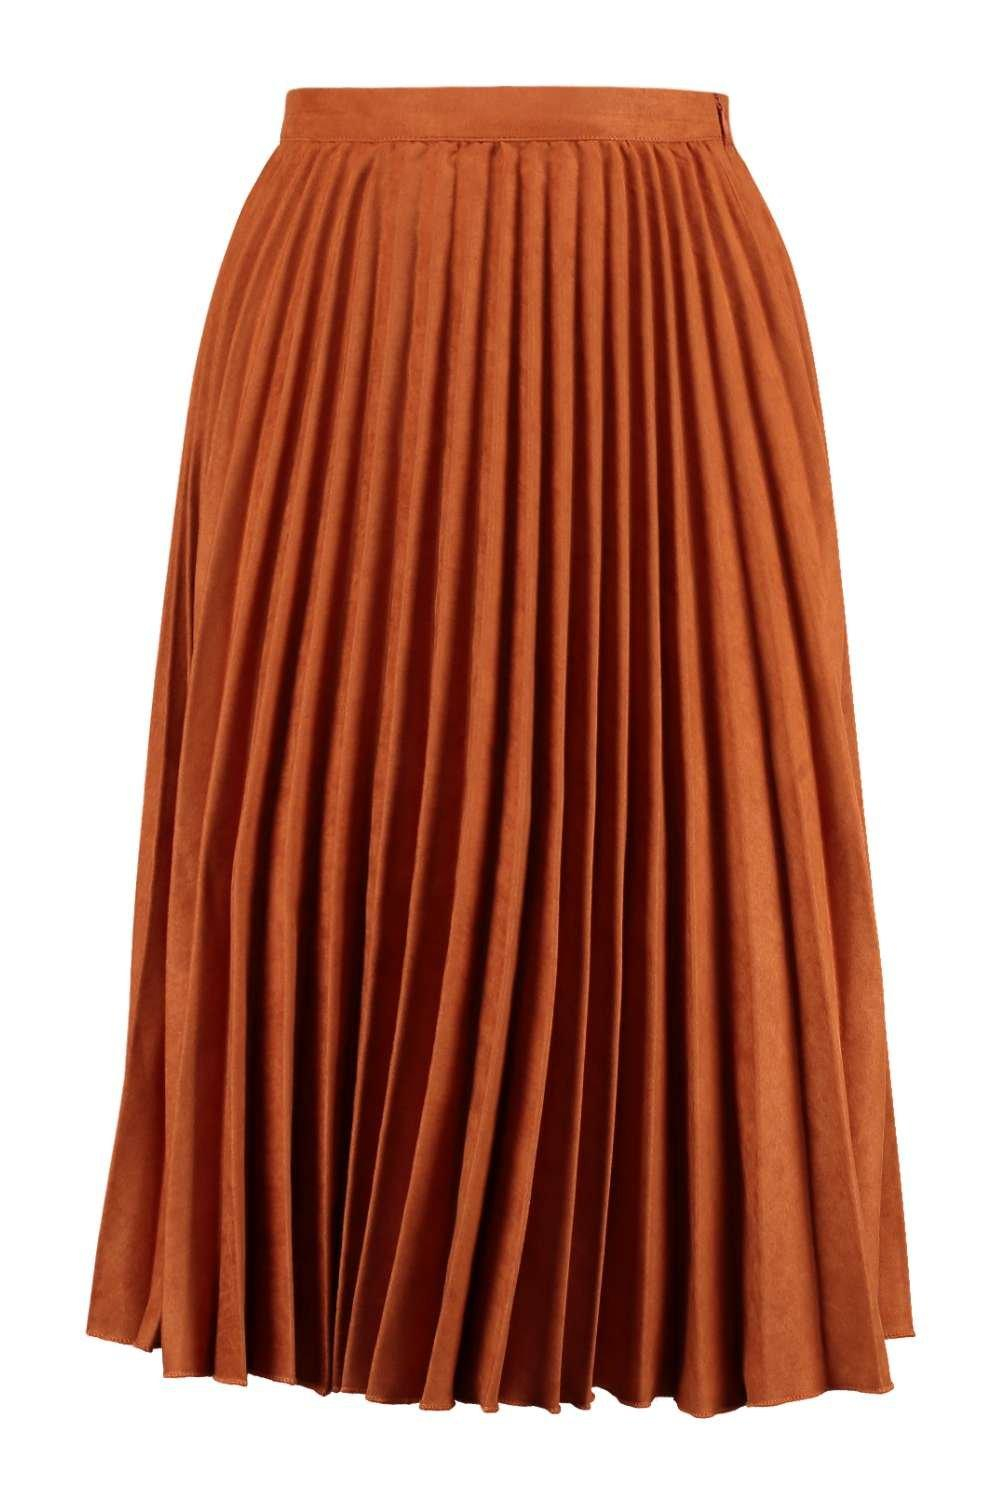 Boohoo Fiona Faux Suede Pleated Midi Skirt in Brown | Lyst